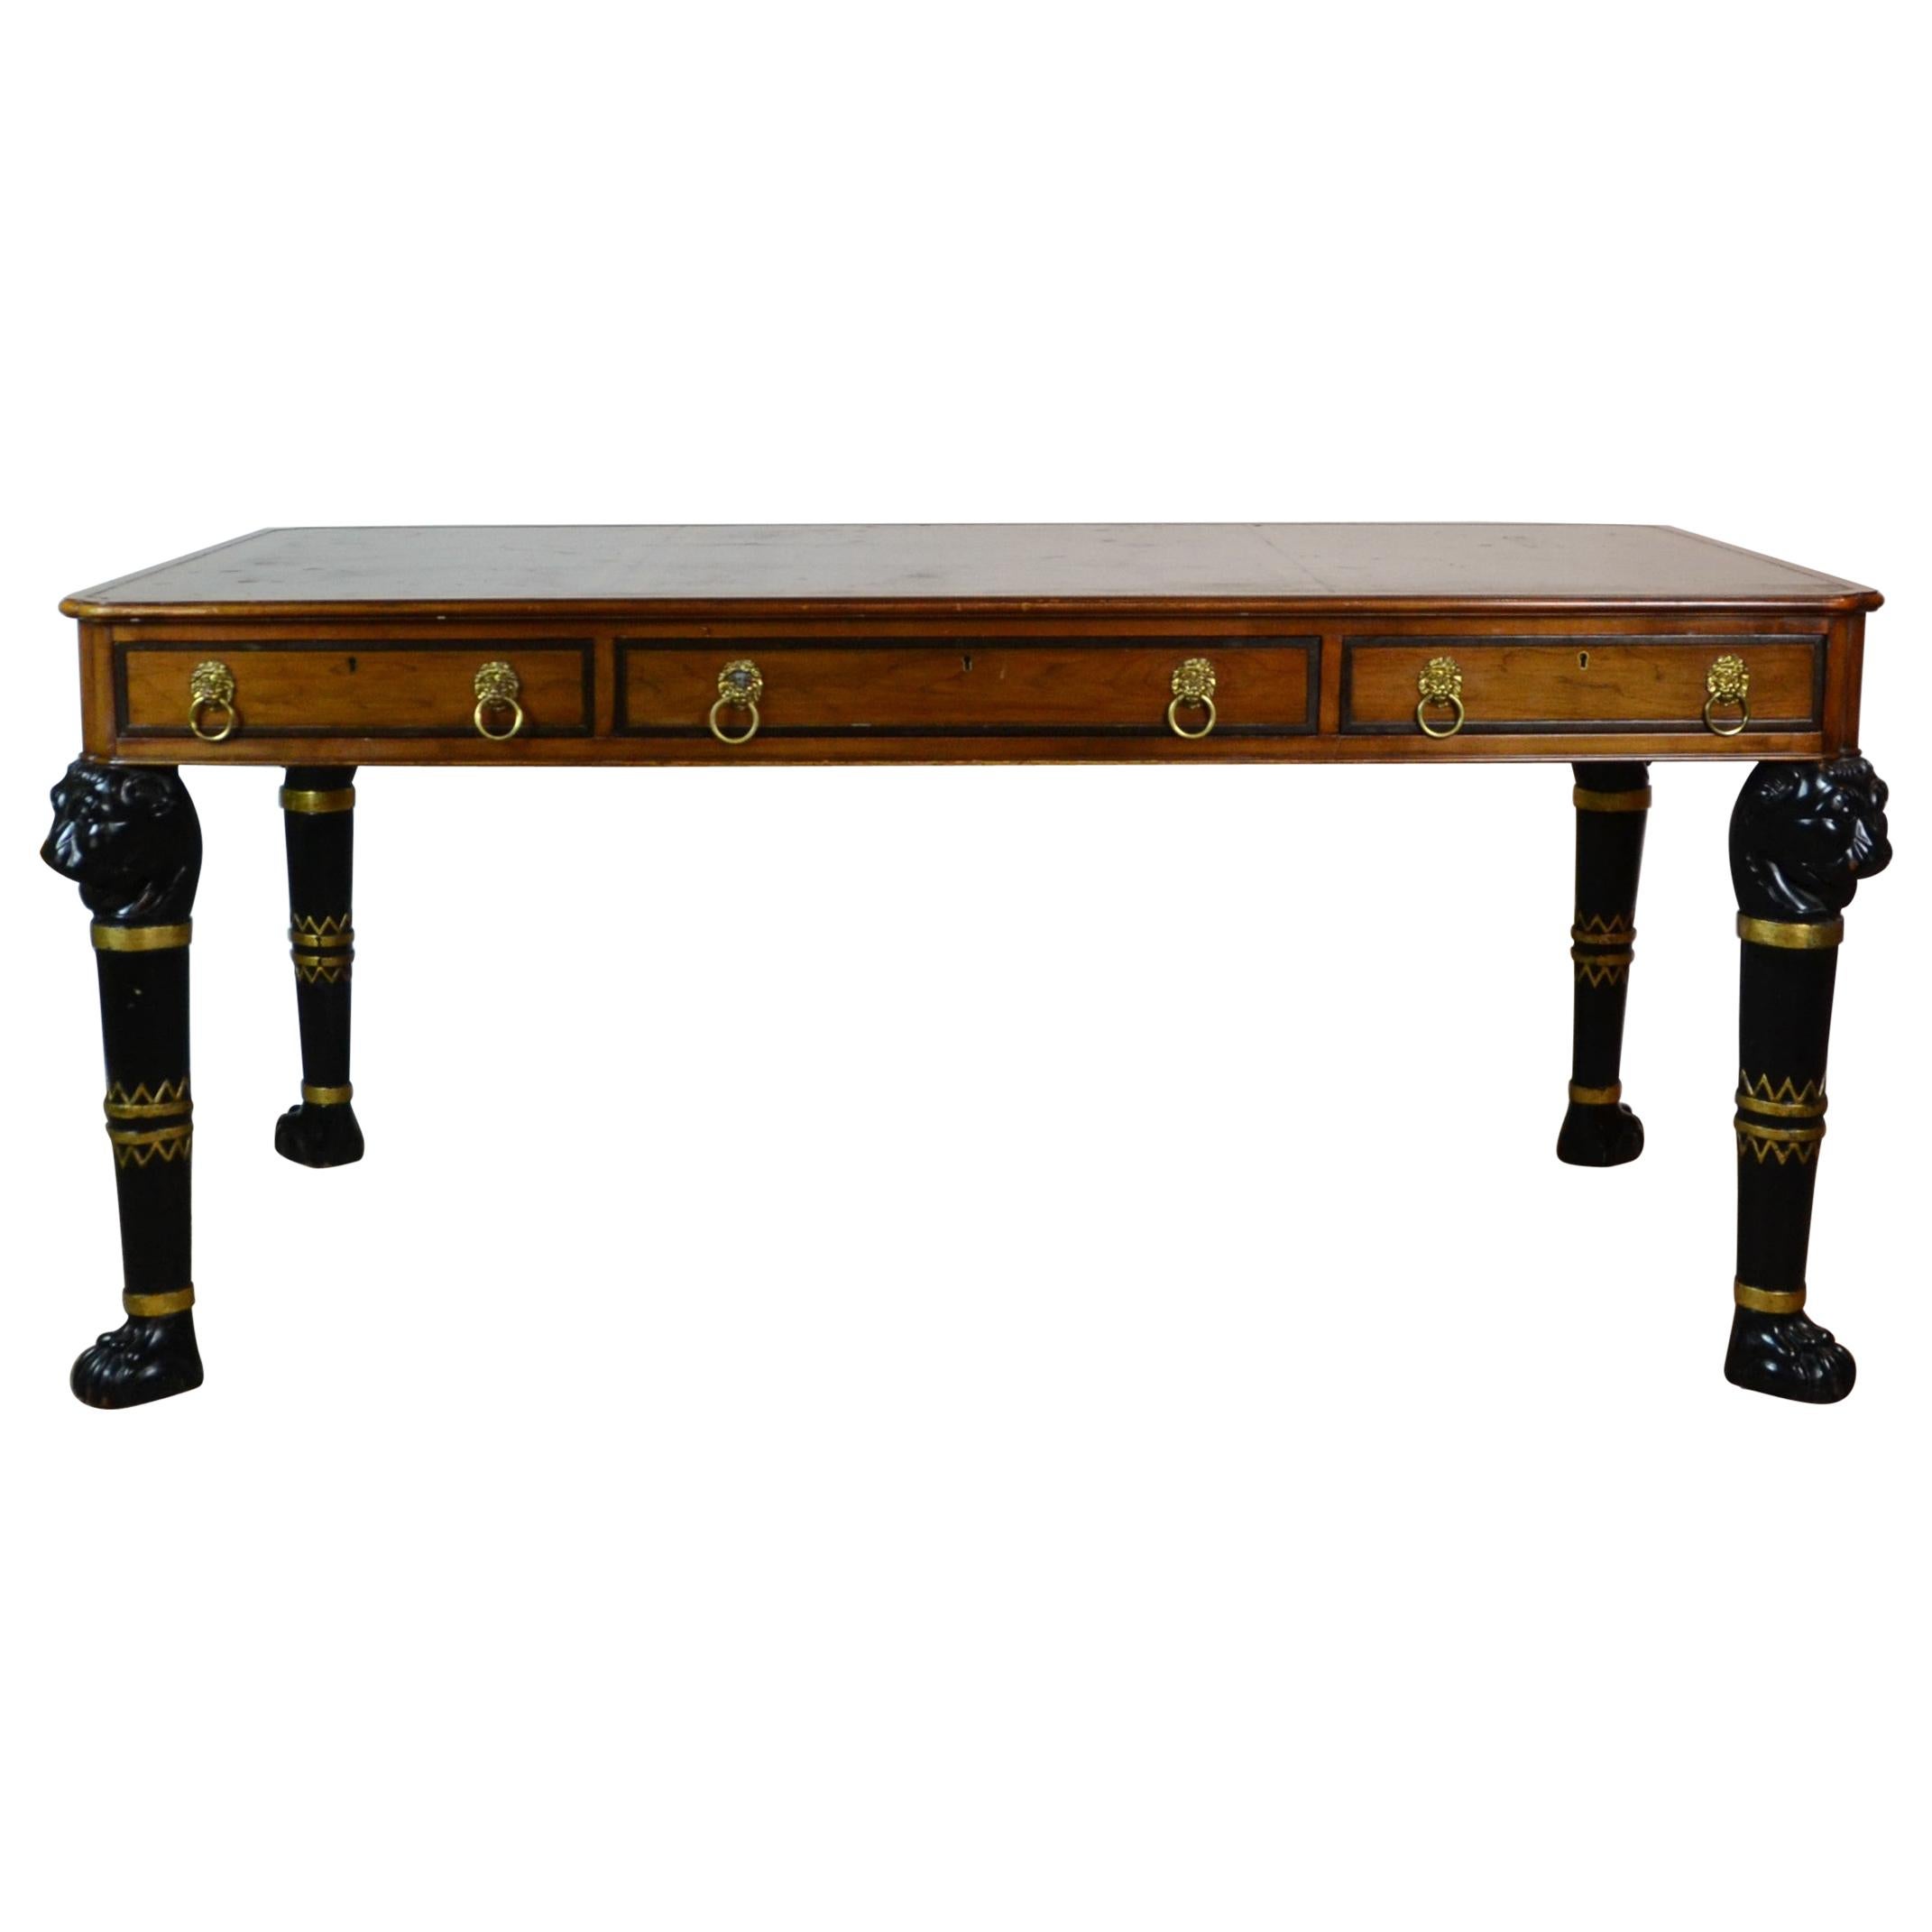 Egyptian Revival Leather Top Desk by Baker